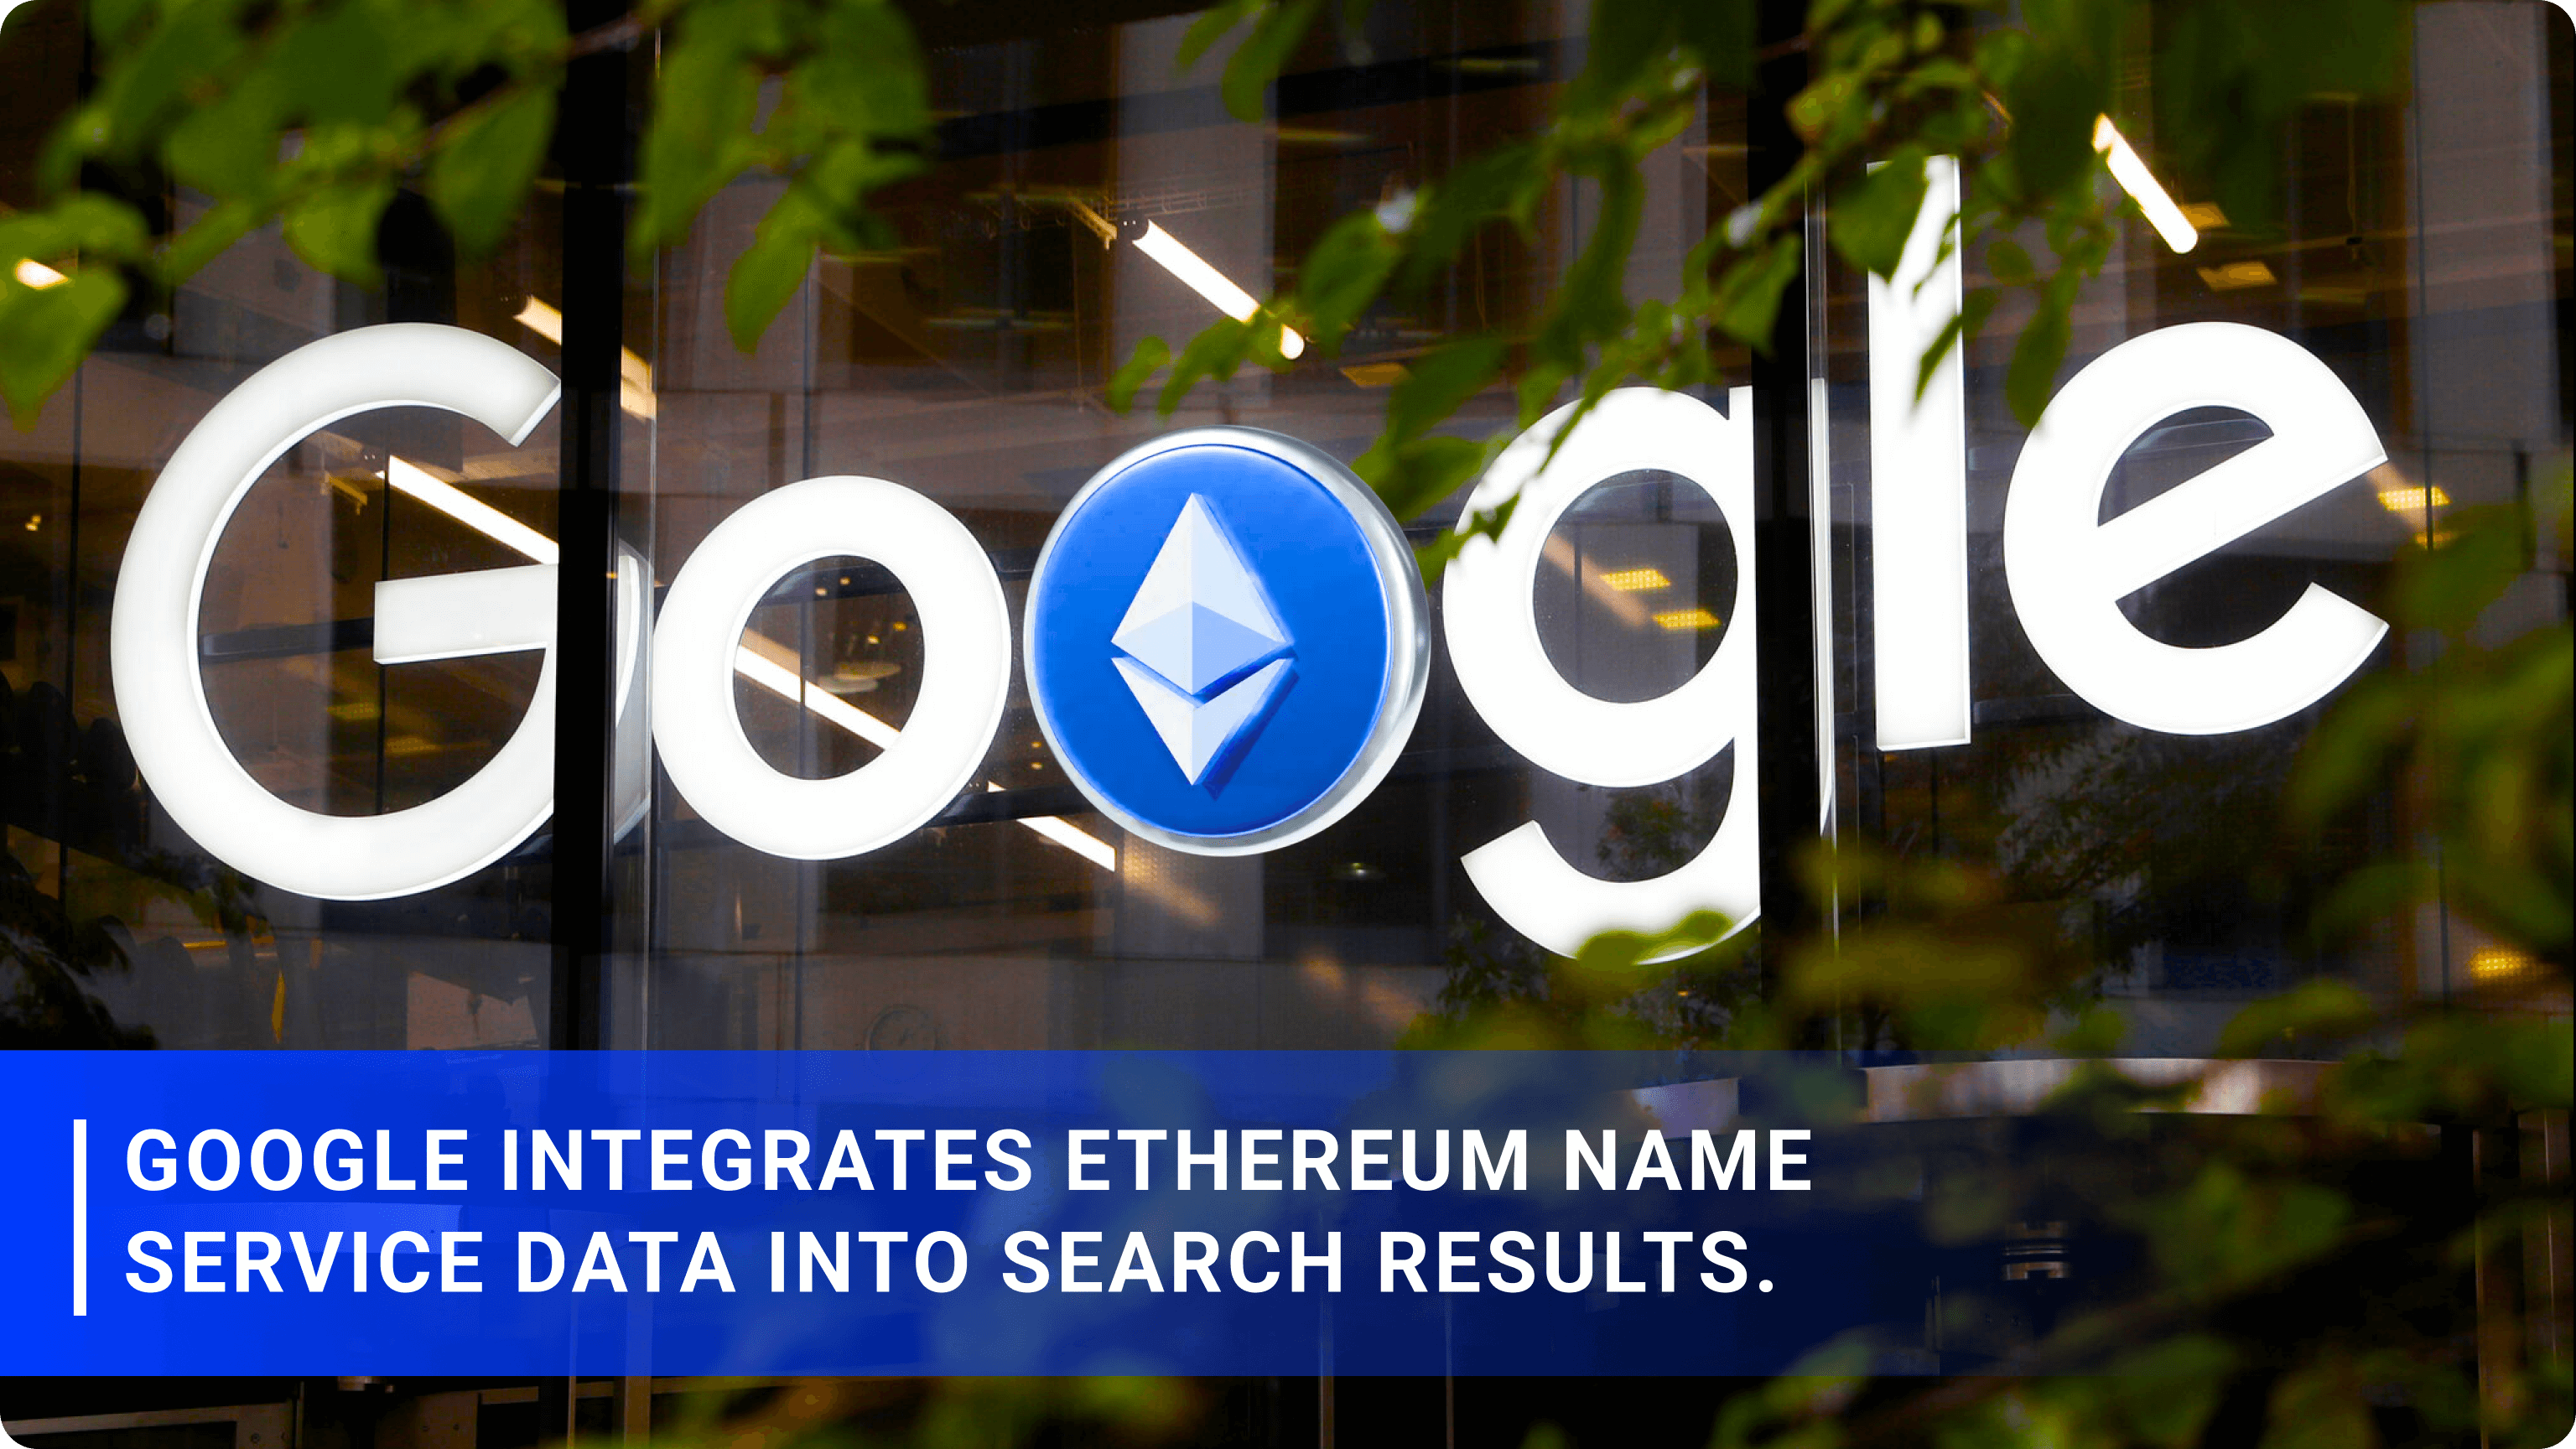 Google Integrates Ethereum Name Service Data into Search Results